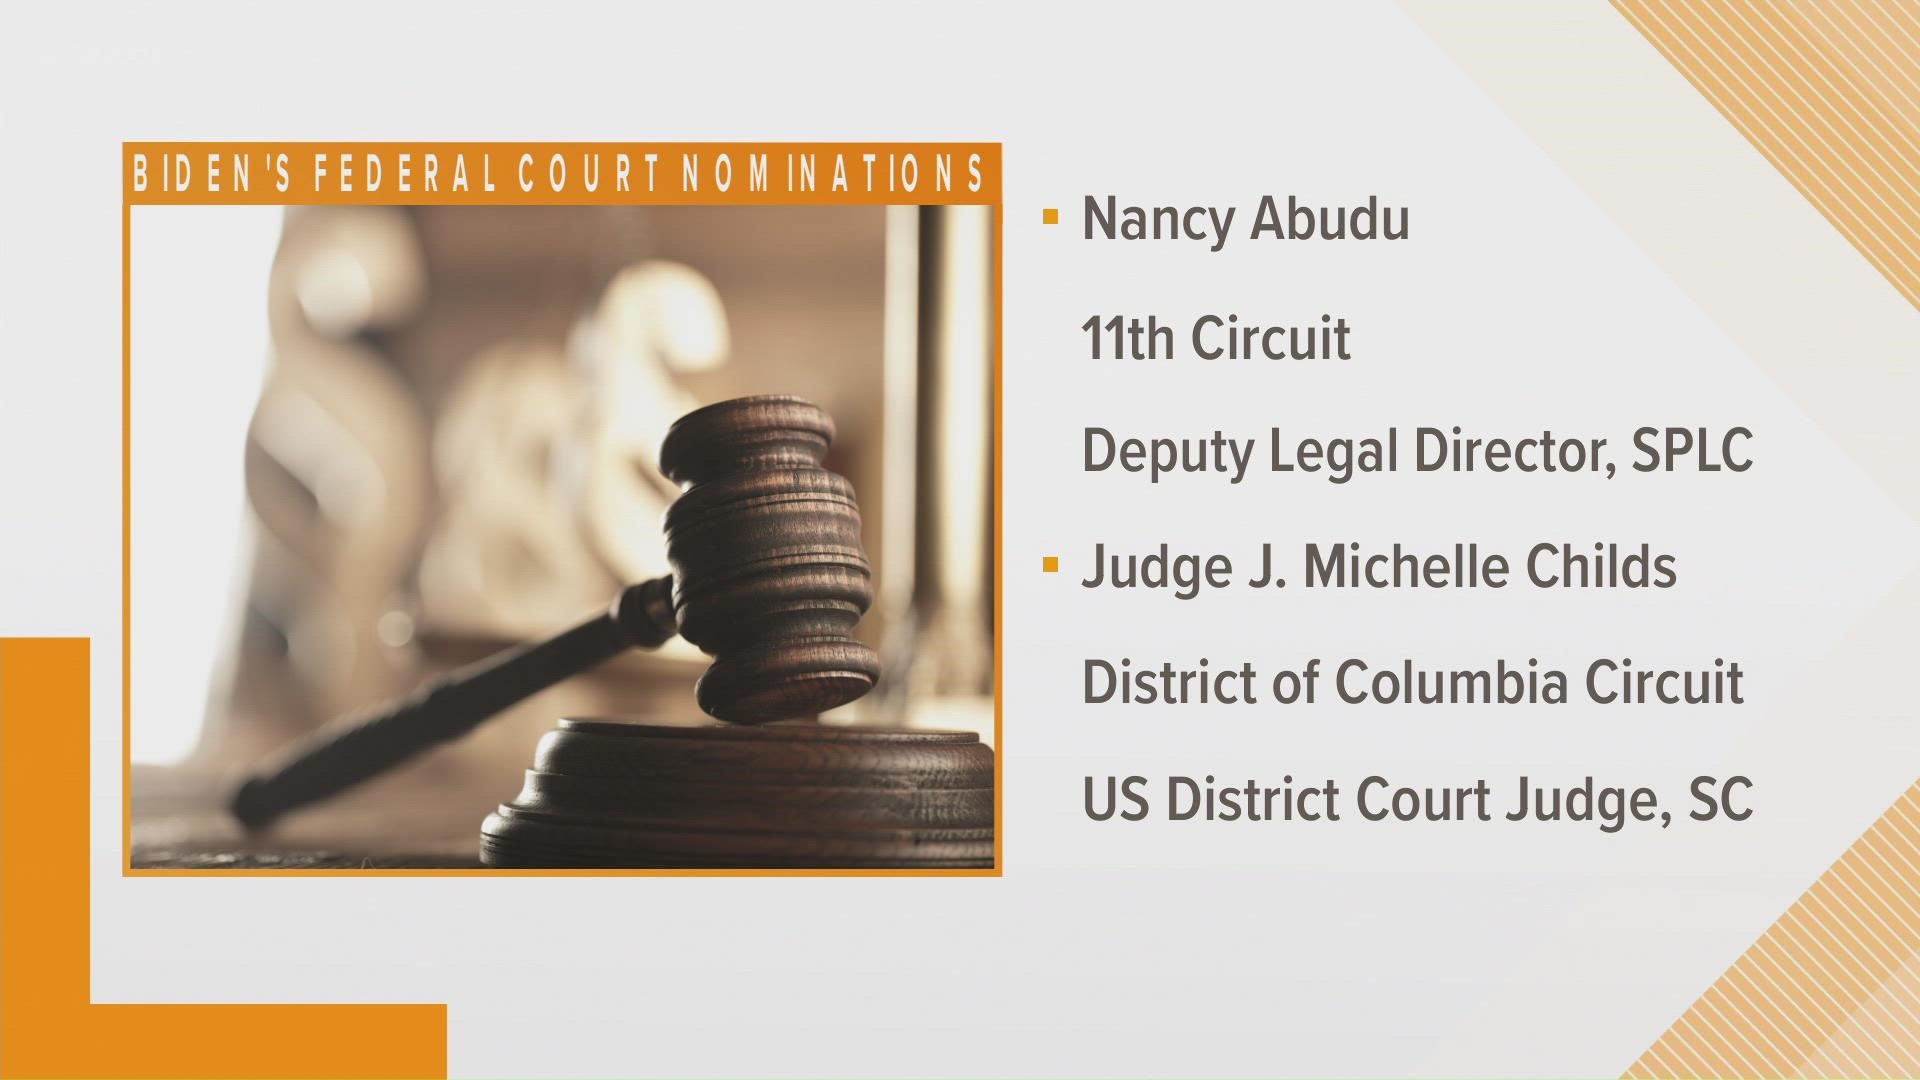 President Biden is nominating J. Michelle Childs, a U.S. District Court judge for South Carolina, to the U.S. Court of Appeals for the District of Columbia Circuit.